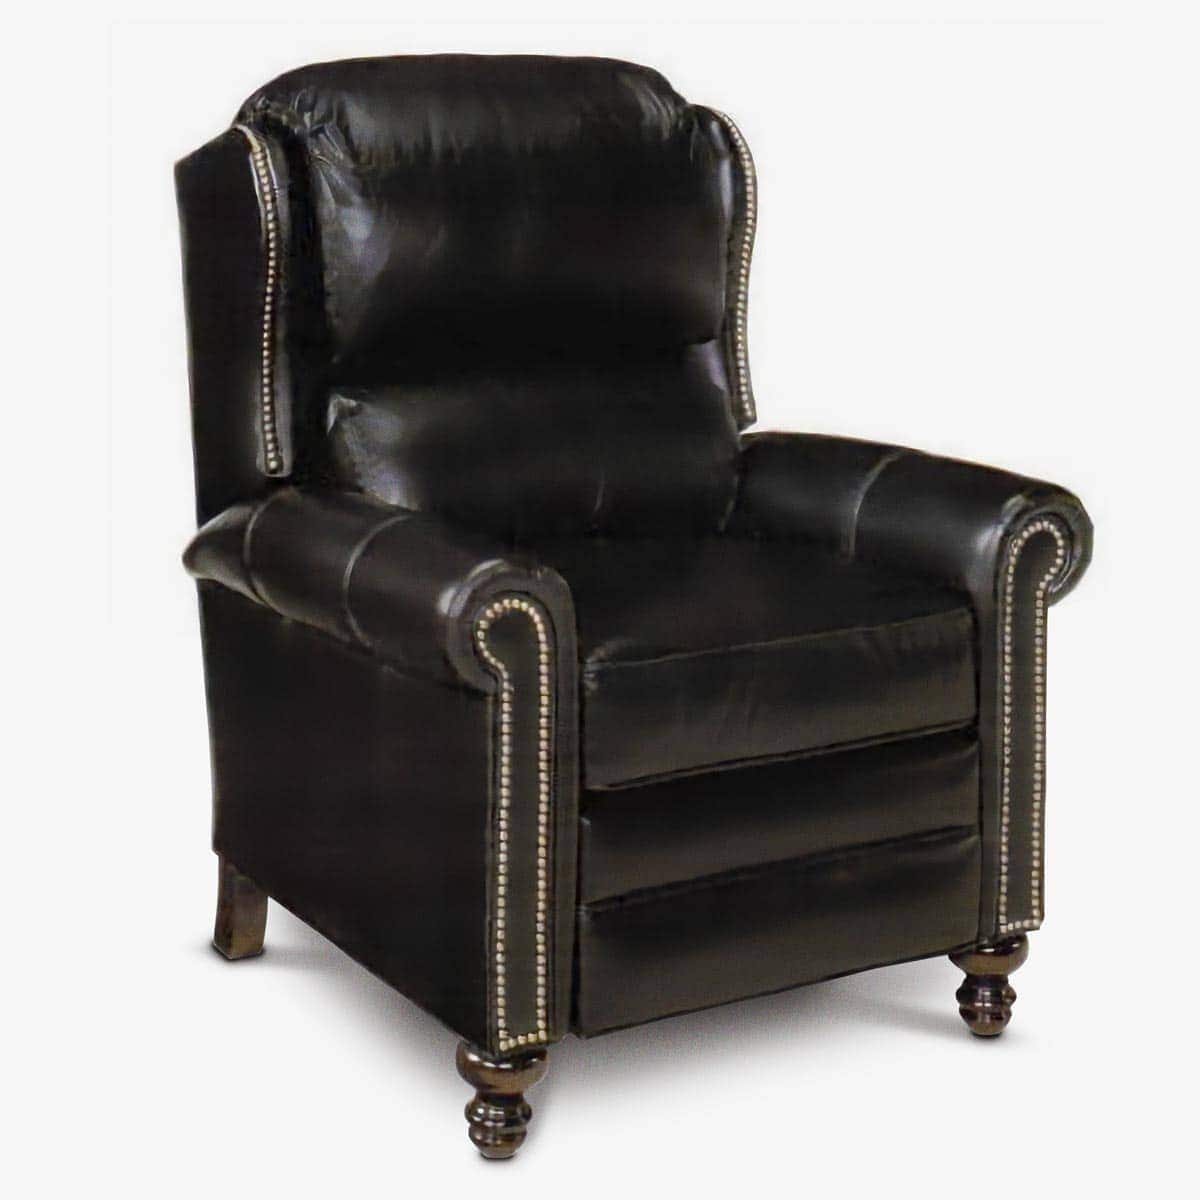 The William: American Made Recliner